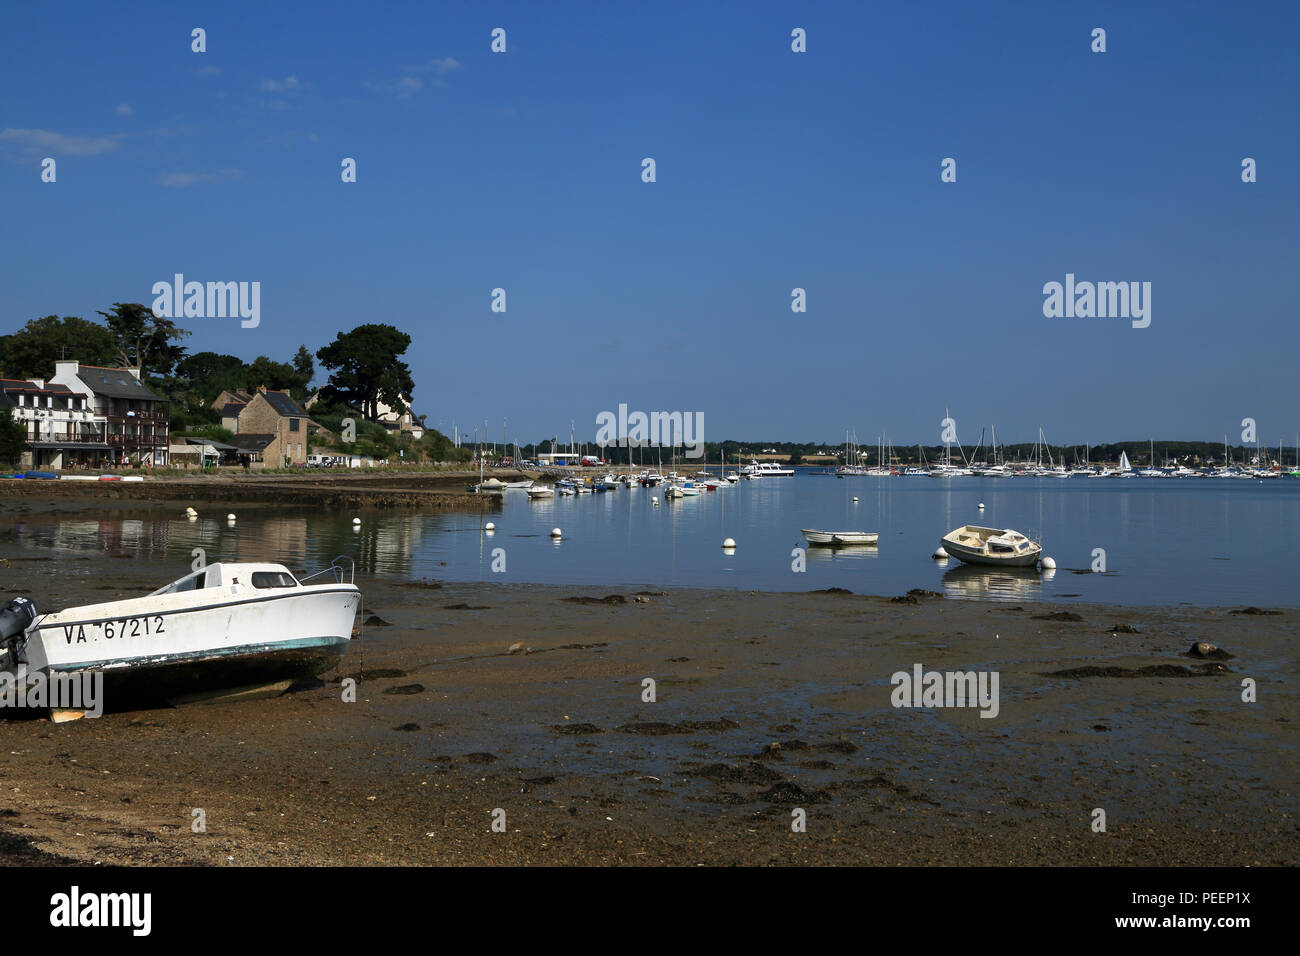 Beach at low tide with boats moored at Rue Benoni Praud, Ile Aux Moines, Morbihan, Brittany, France Stock Photo